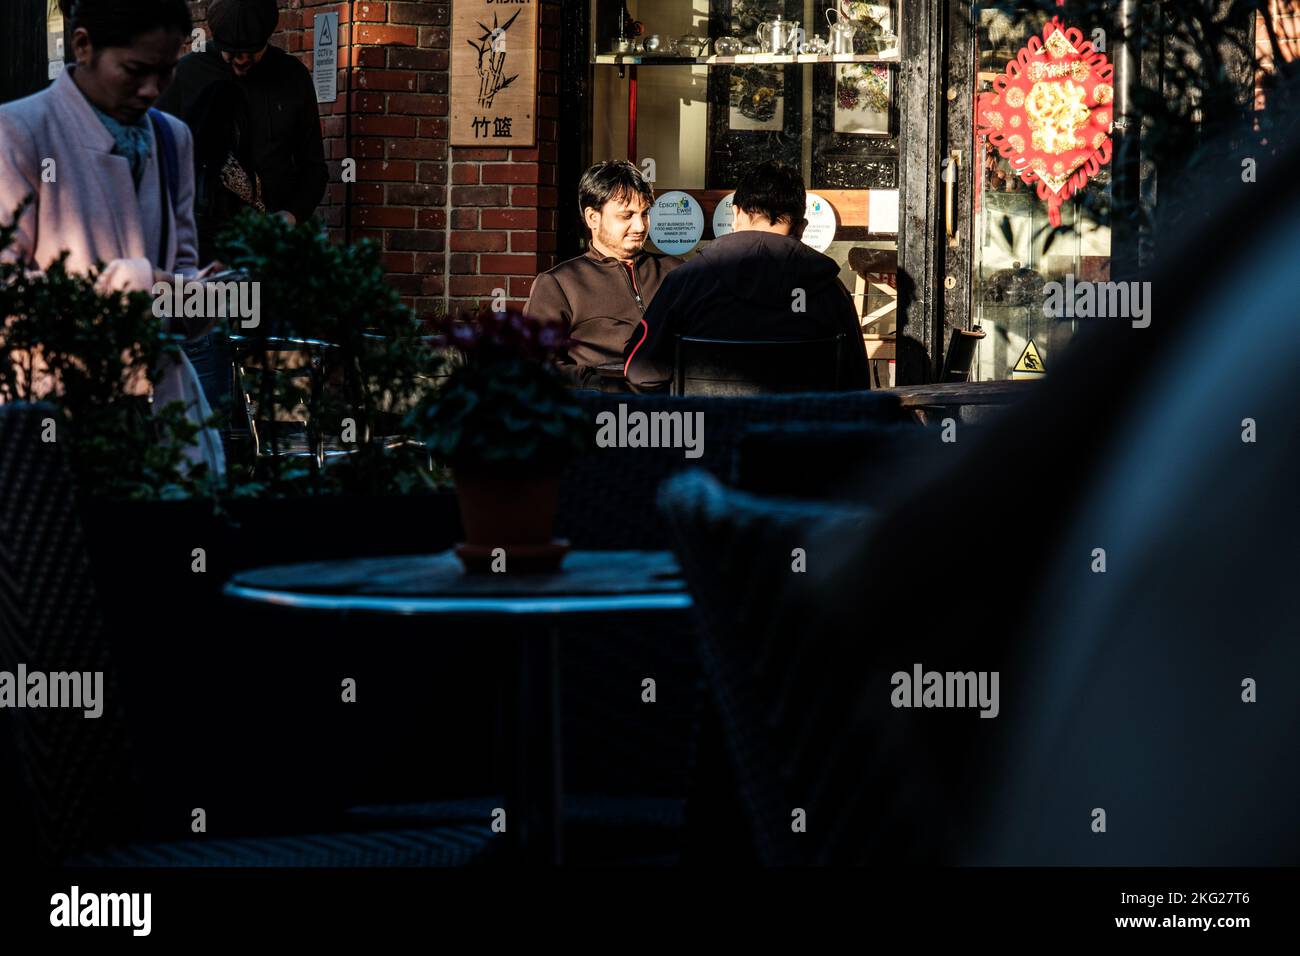 Epsom, Surrey, London UK, November 19 2022, Two Men Sitting Outside A Restaurant Eating And Talking In The Evening Sun With People Passing By Stock Photo